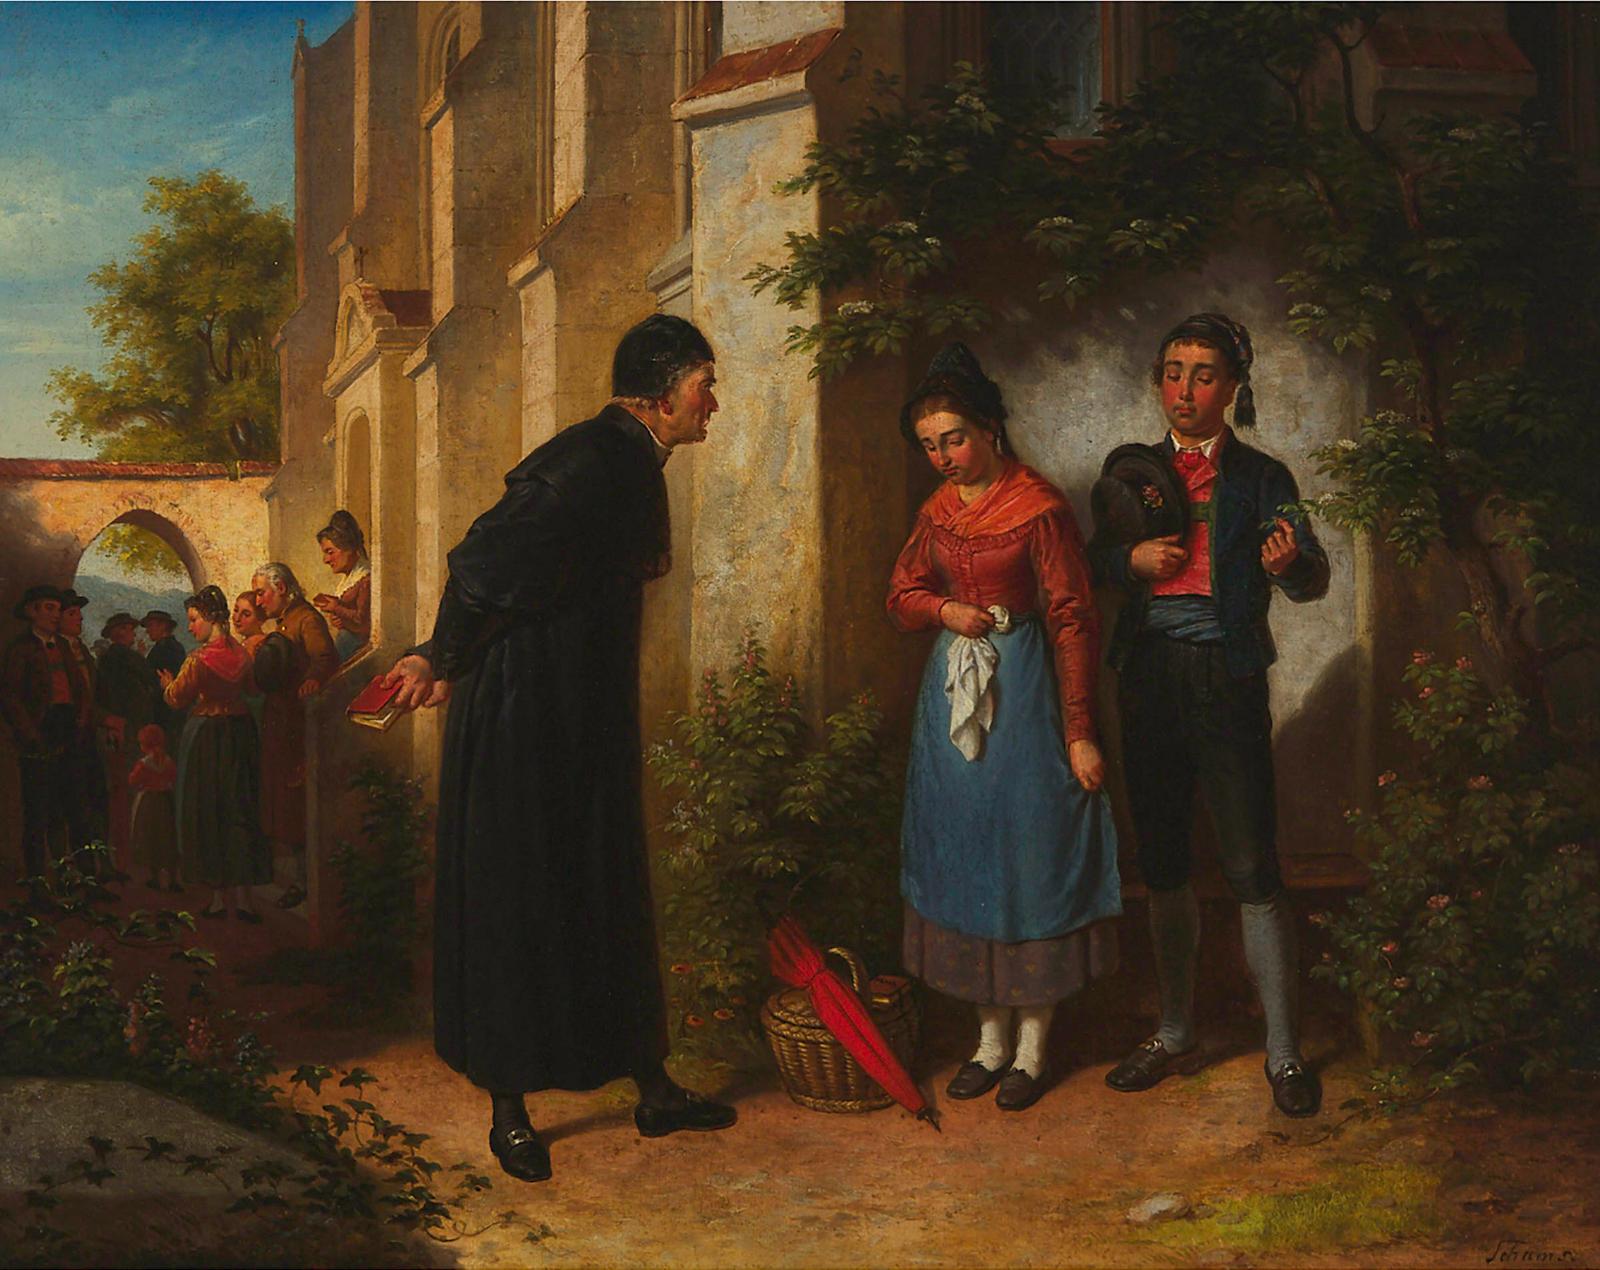 Franz Schams (1823) - Die Ermahnung (The Admonition) Or The Missed Sermon - A Young Couple Is Rebuked By The Pastor